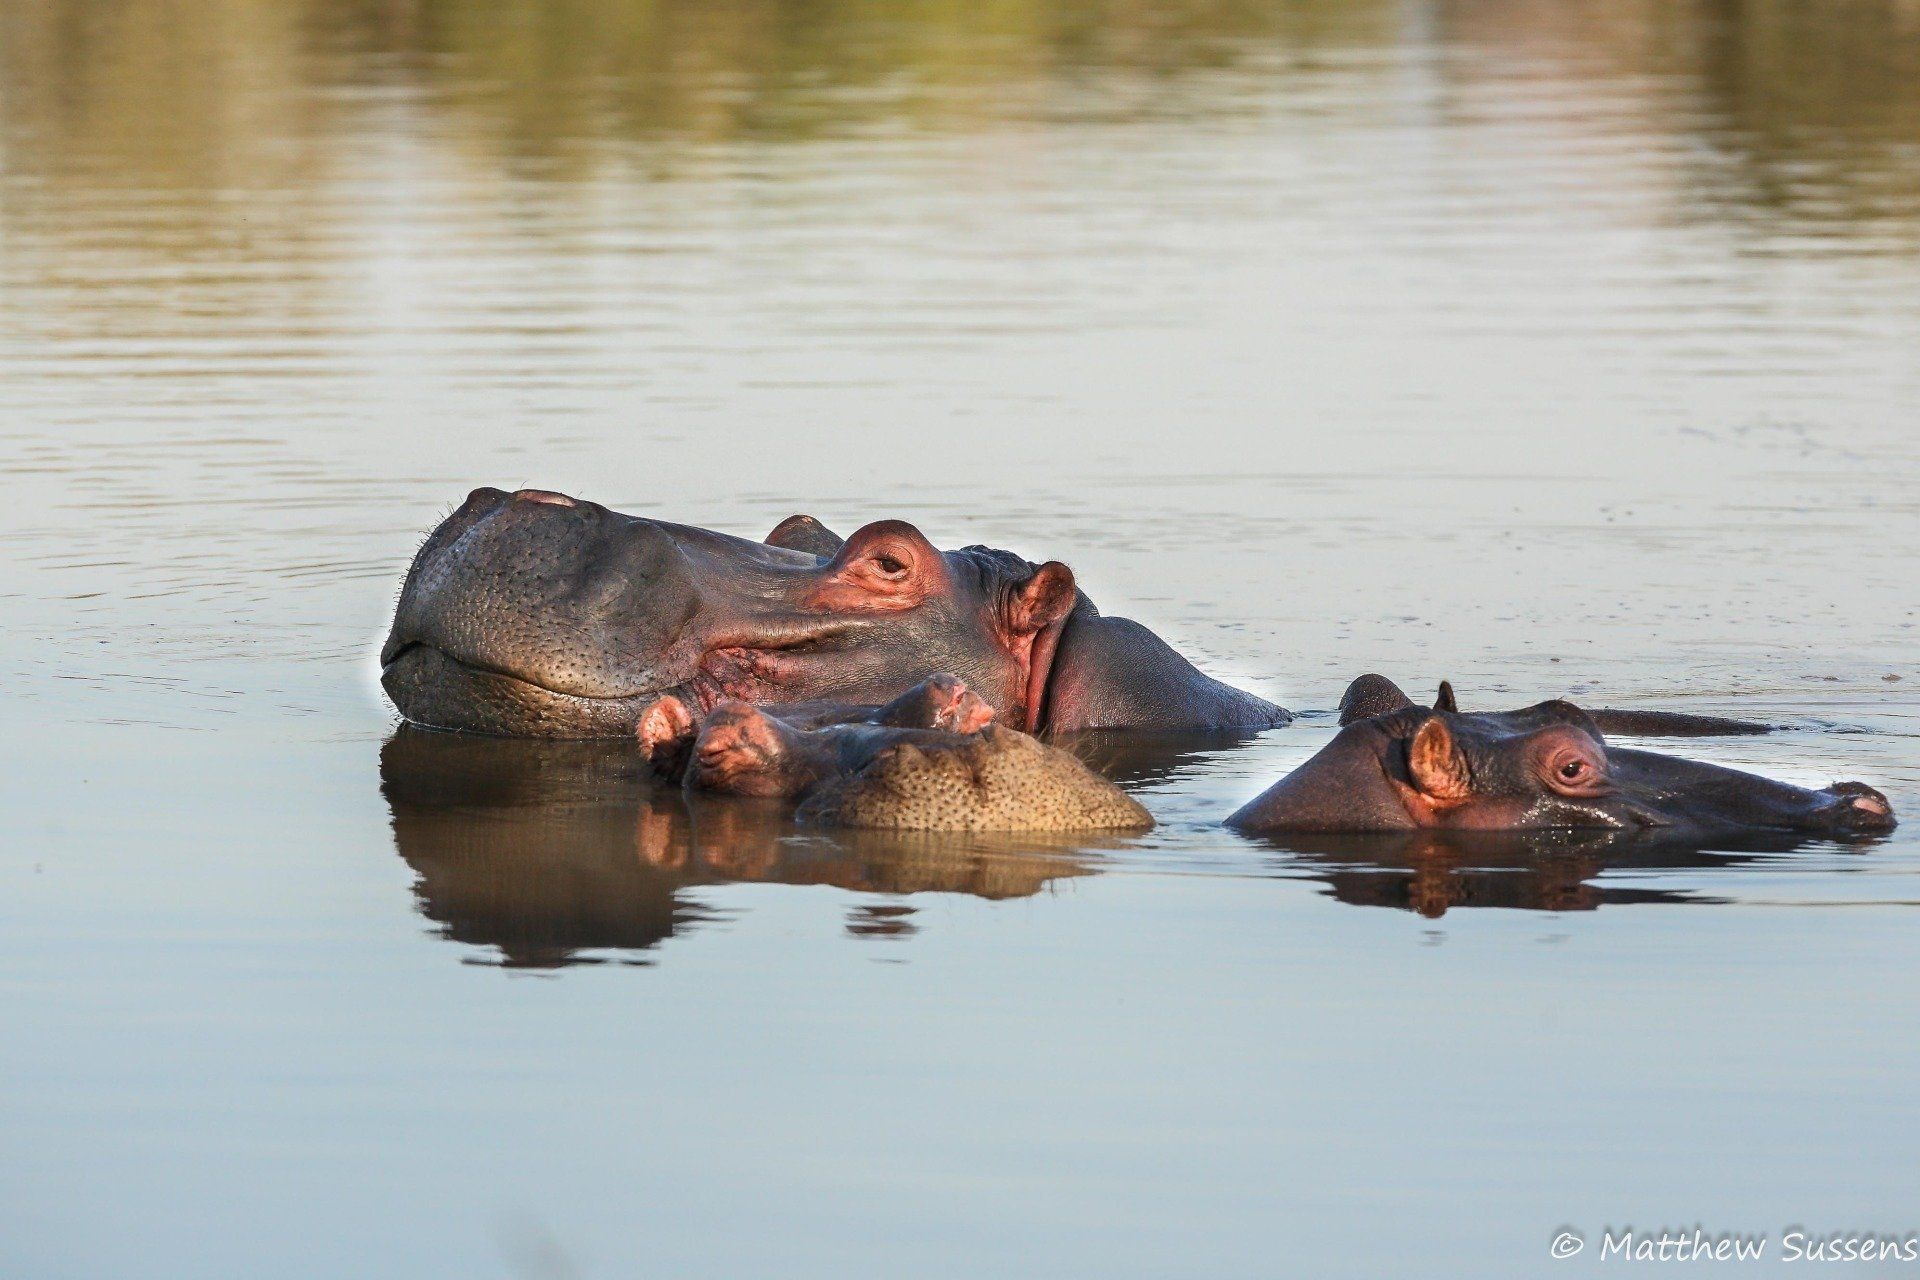 A couple of hippos are swimming in the water.